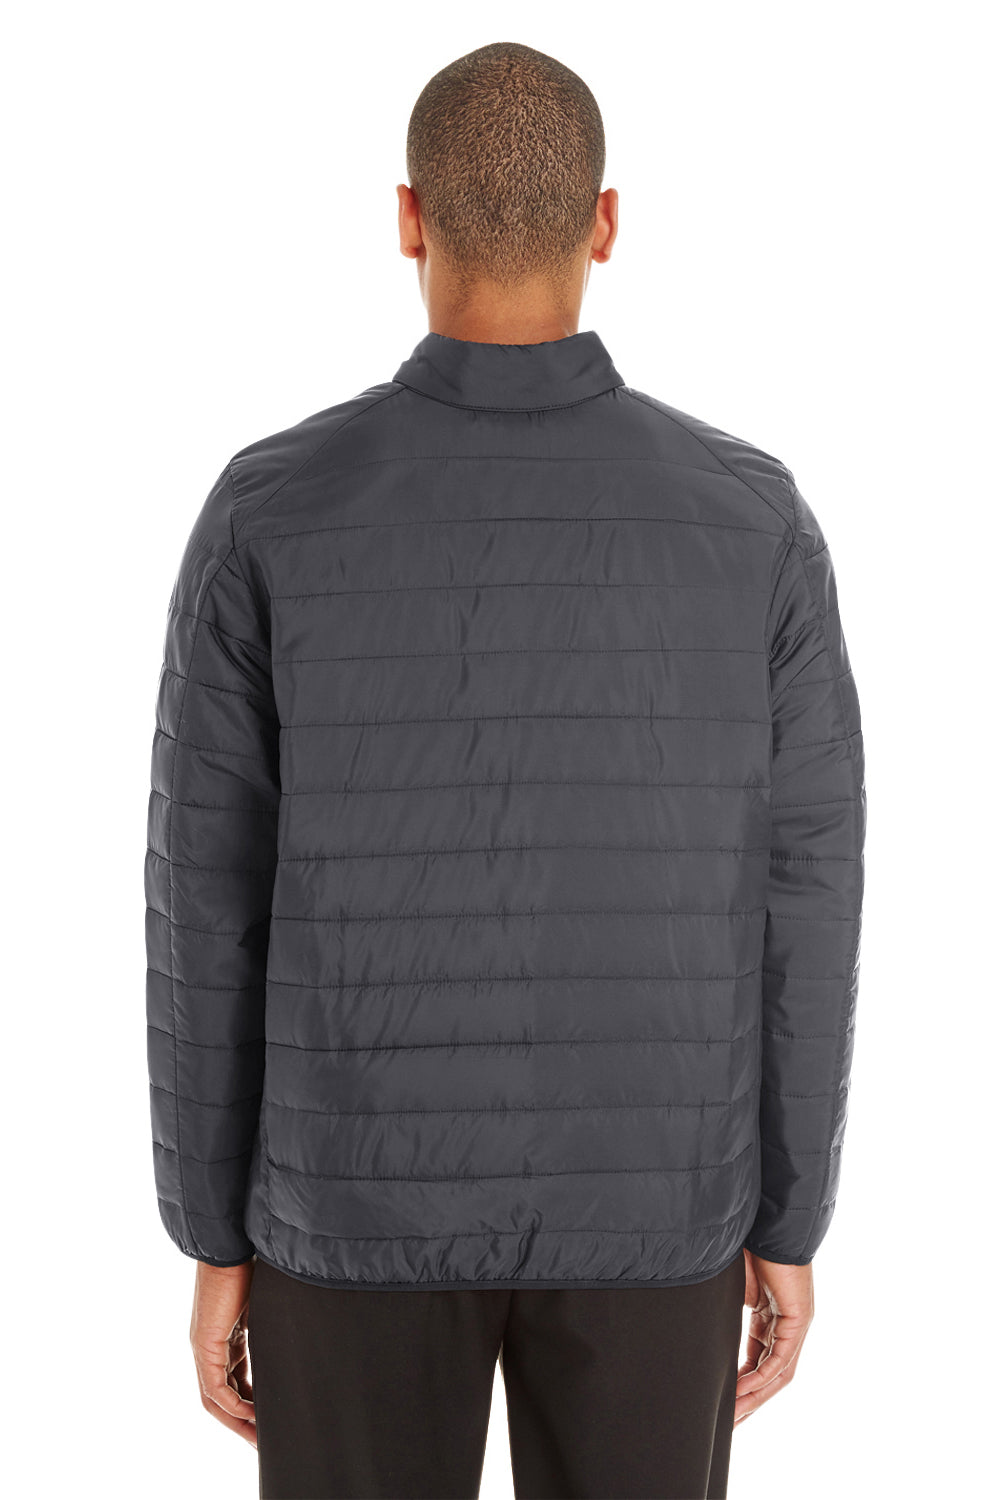 Core 365 CE700 Mens Prevail Packable Puffer Water Resistant Full Zip Jacket Carbon Grey Back